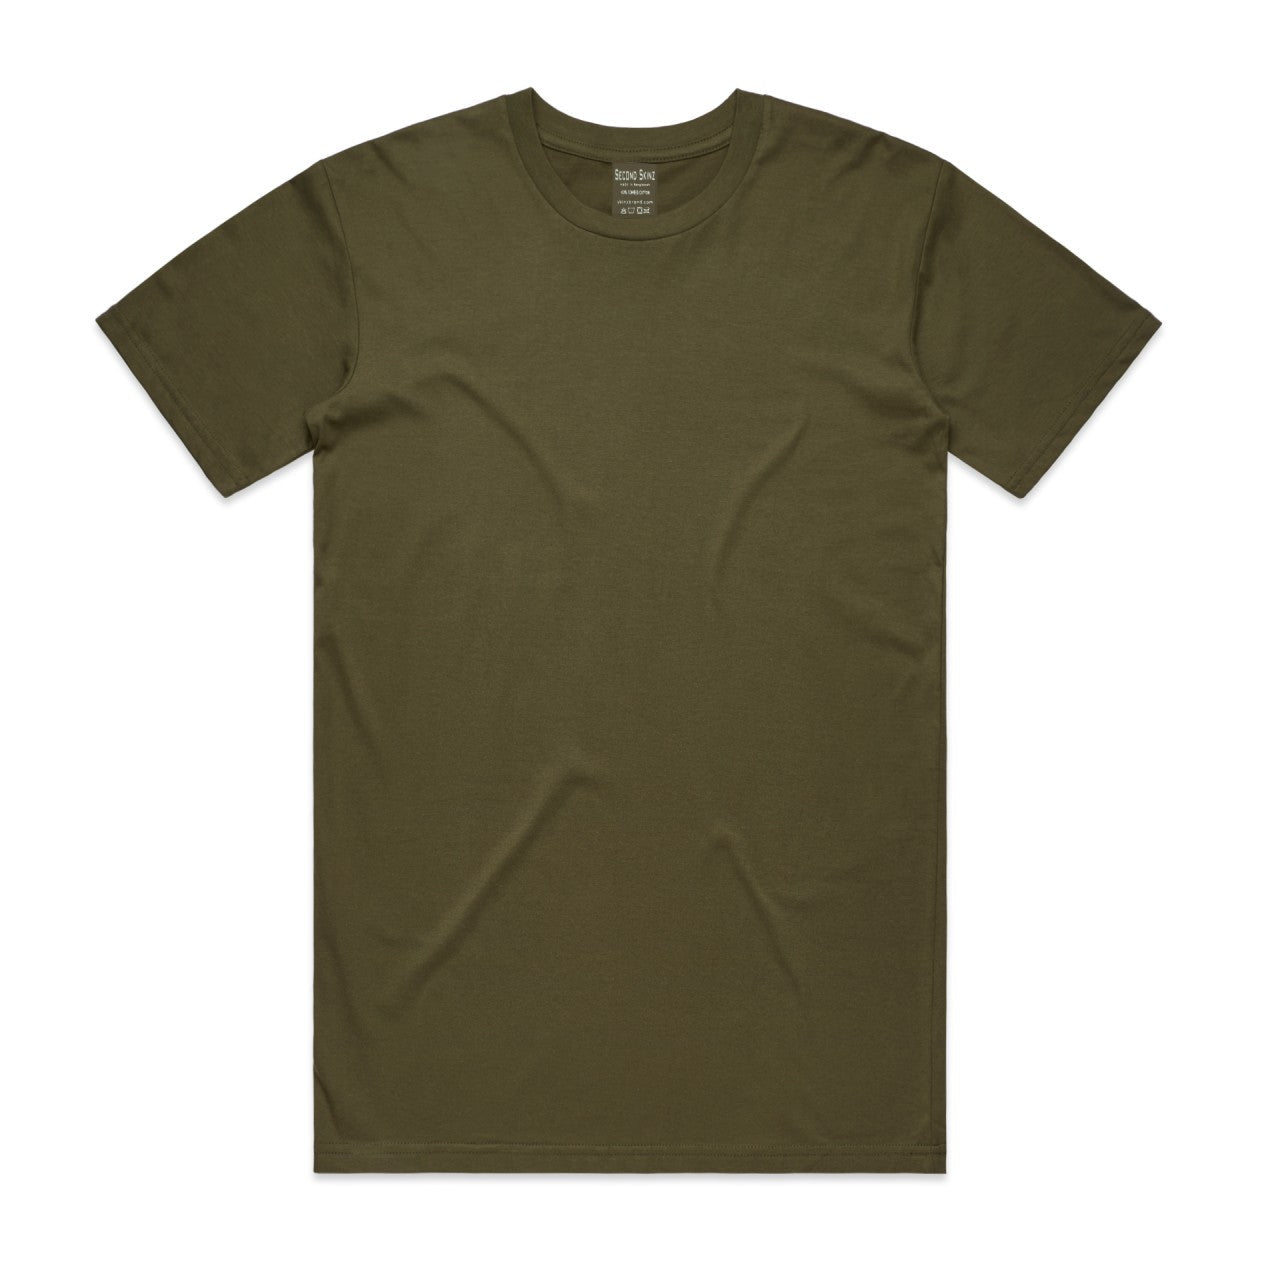 The Army Green Iconic Classic T-Shirt from Second Skinz